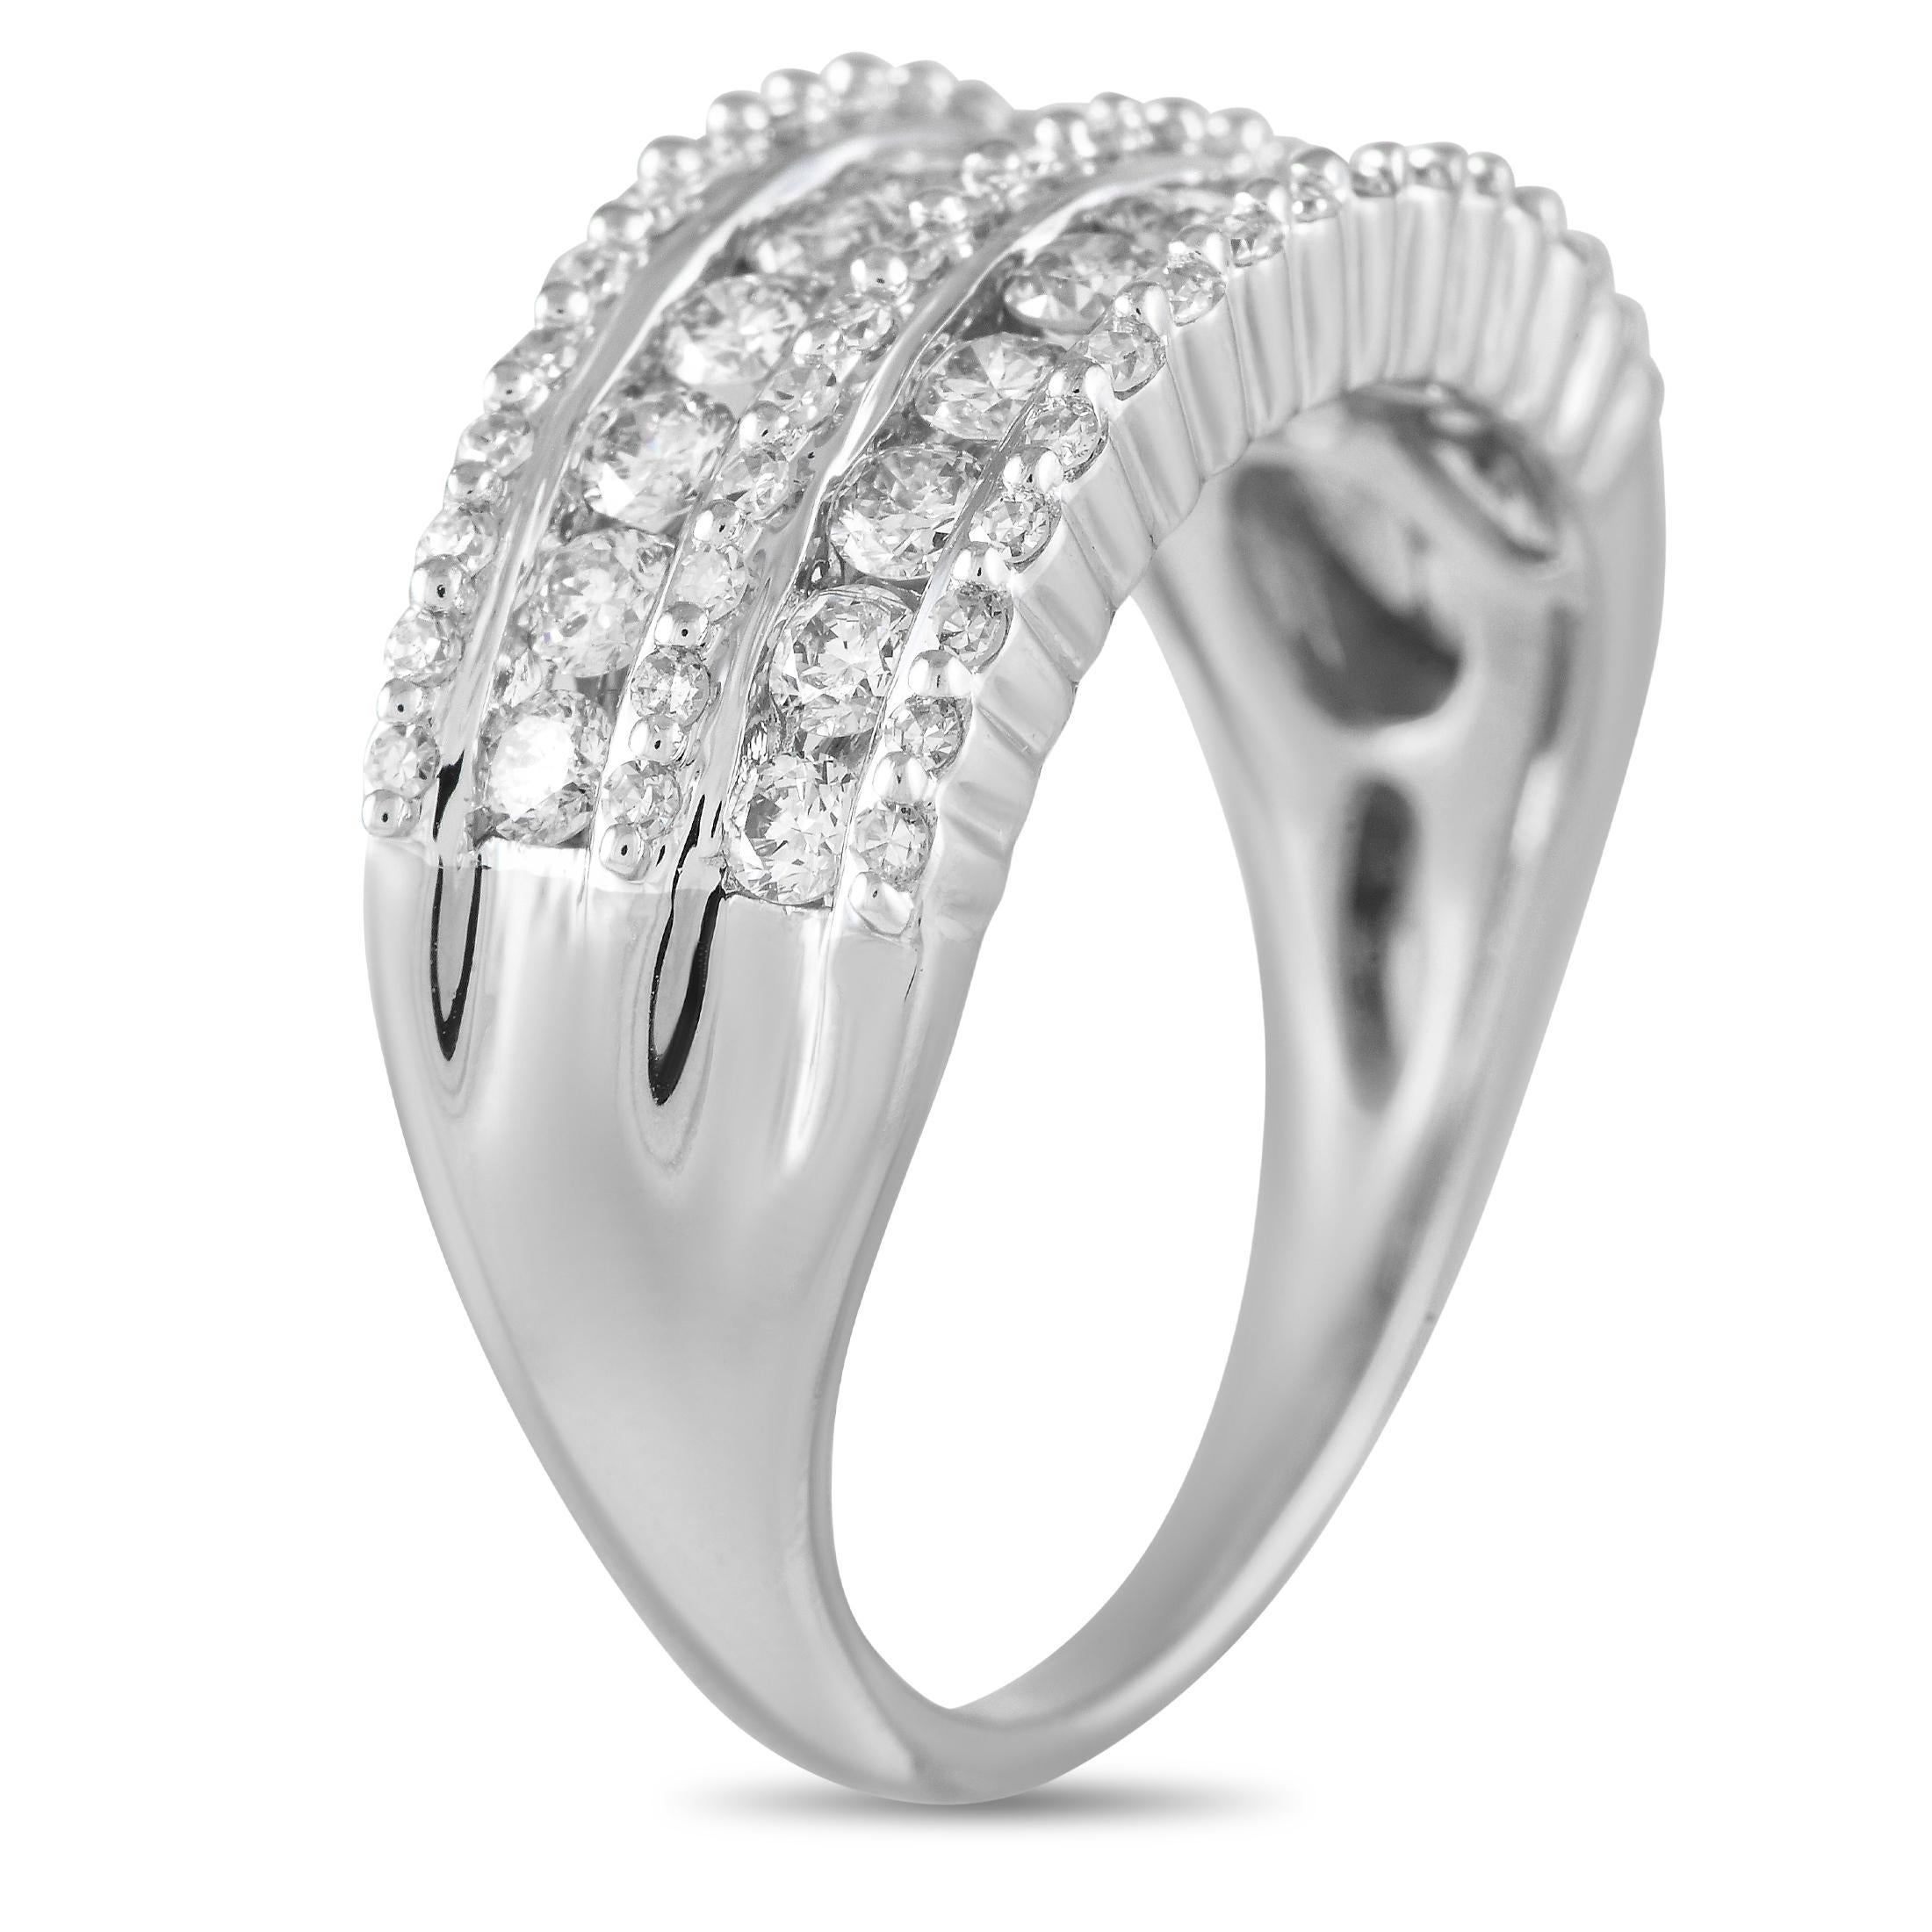 Rows of sparkling Diamonds with a total weight of 1.15 carats make this radiant ring simply unforgettable. This pieces understated 14K white gold setting features a band width and top height measuring 3mm.This jewelry piece is offered in brand new